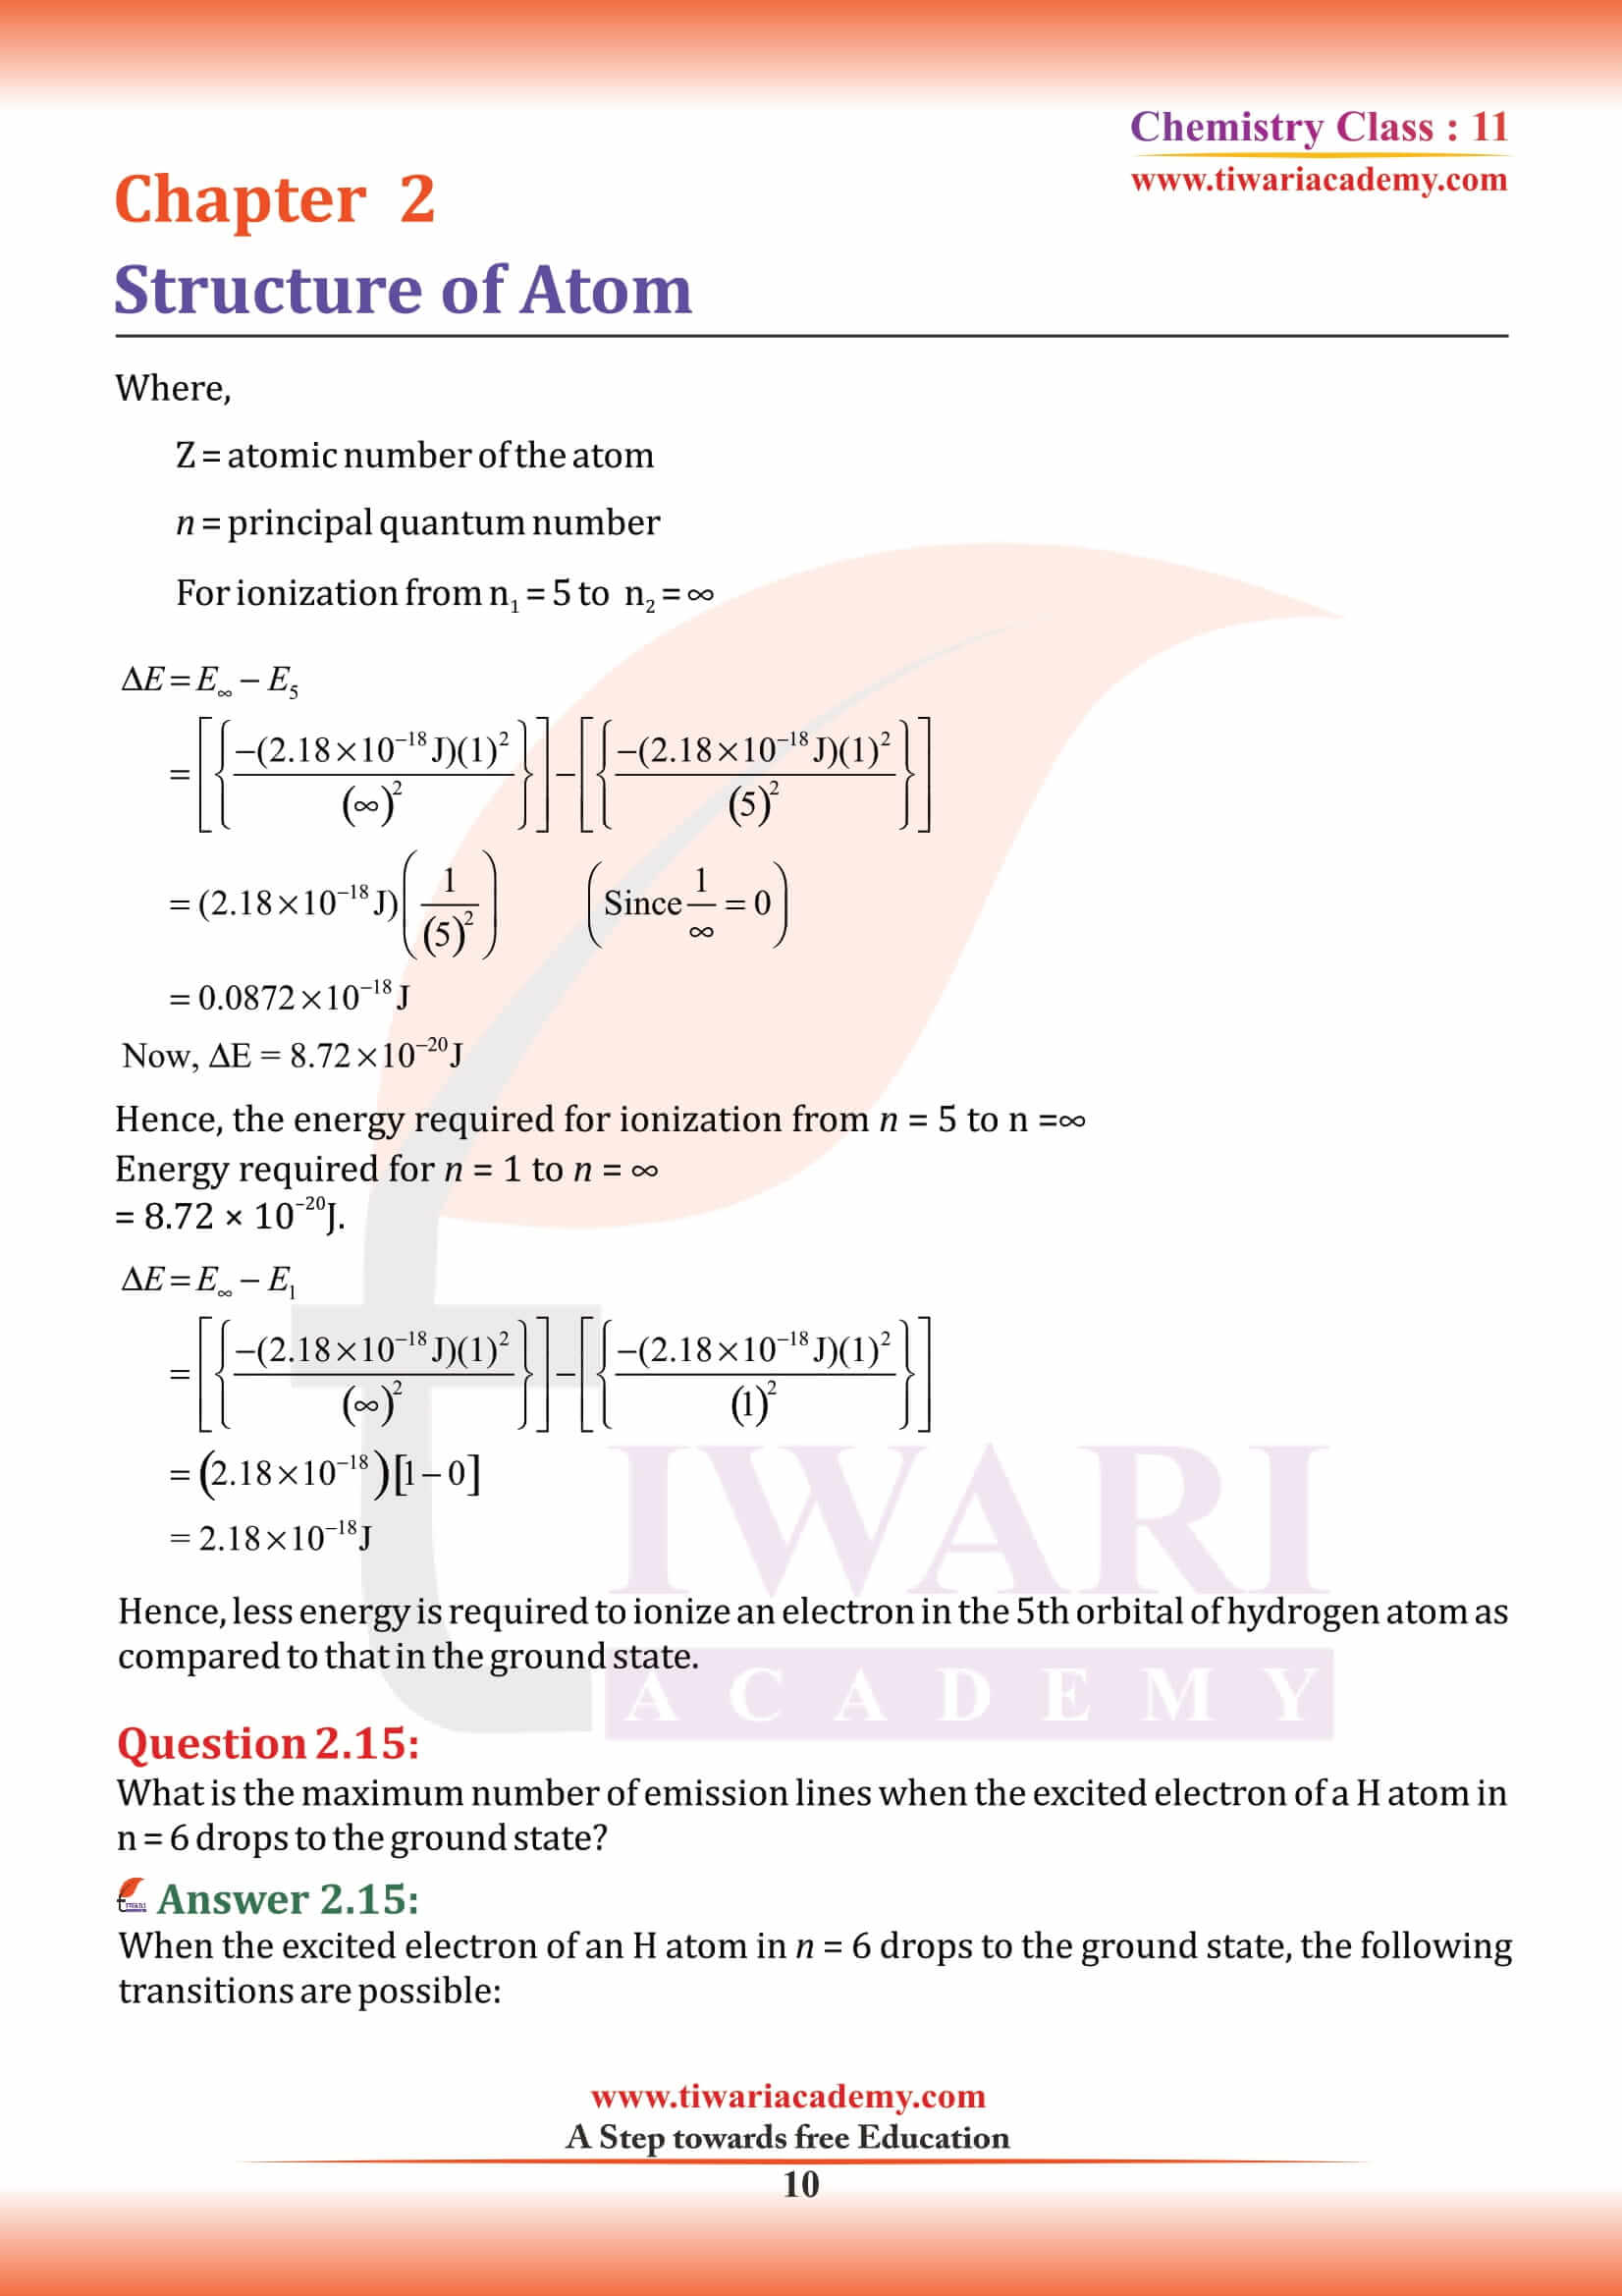 NCERT Solutions for Class 11 Chemistry Chapter 2 free download